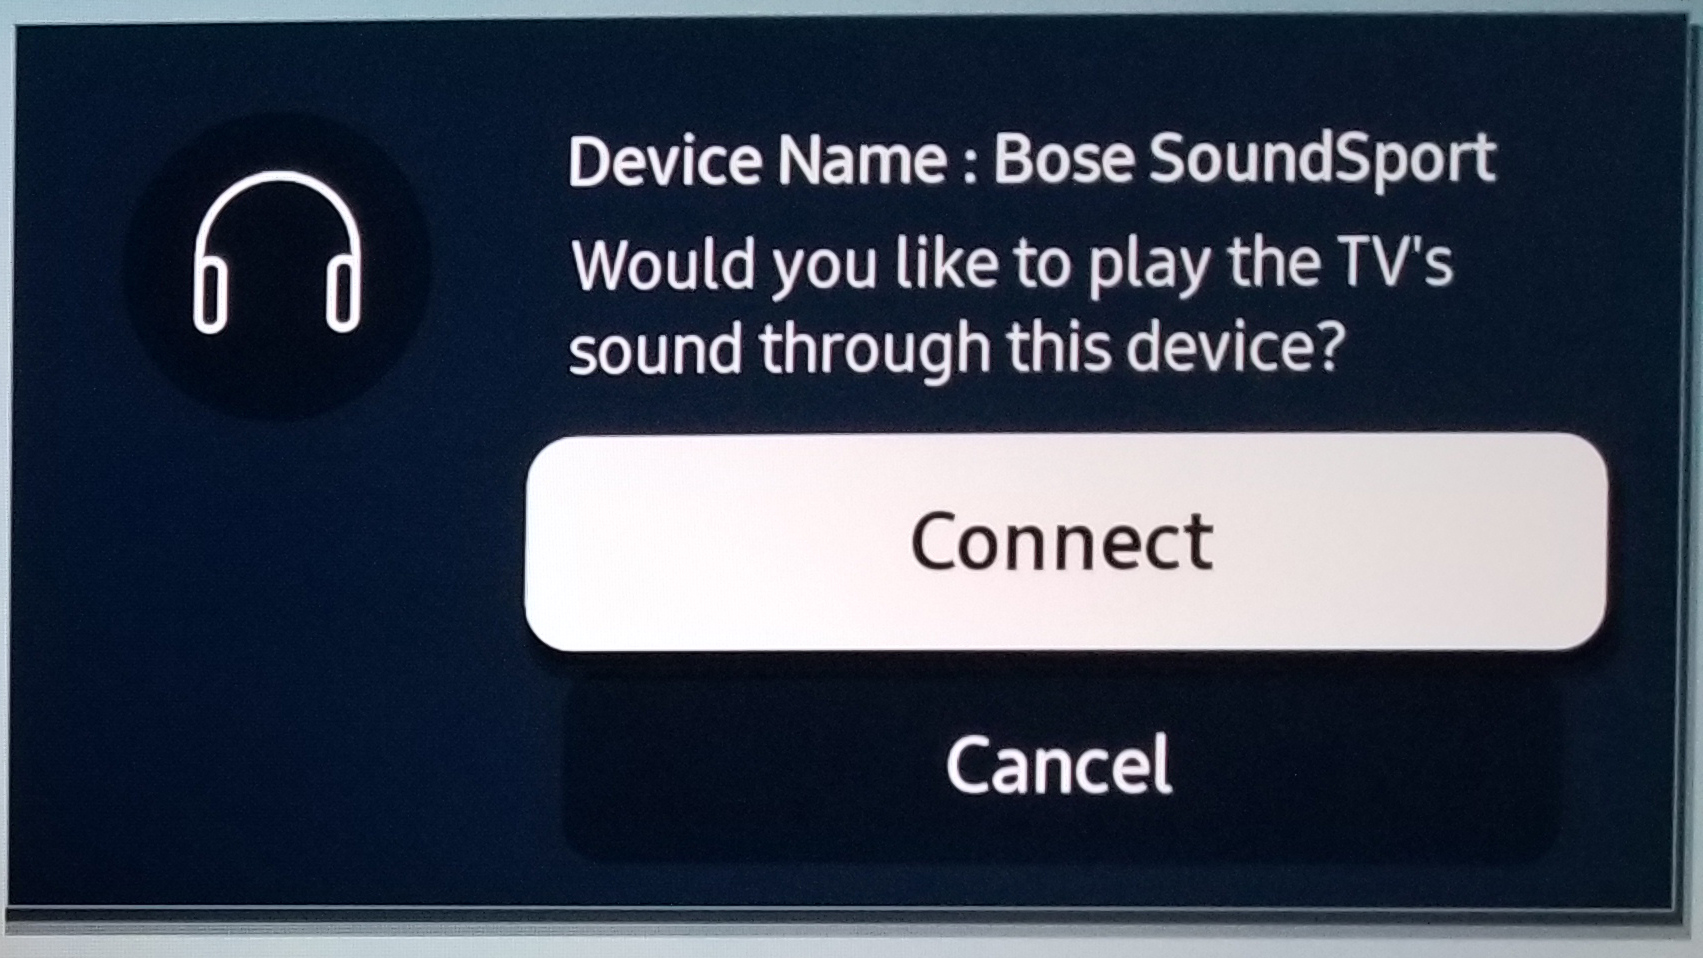 Bluetooth Connection Request